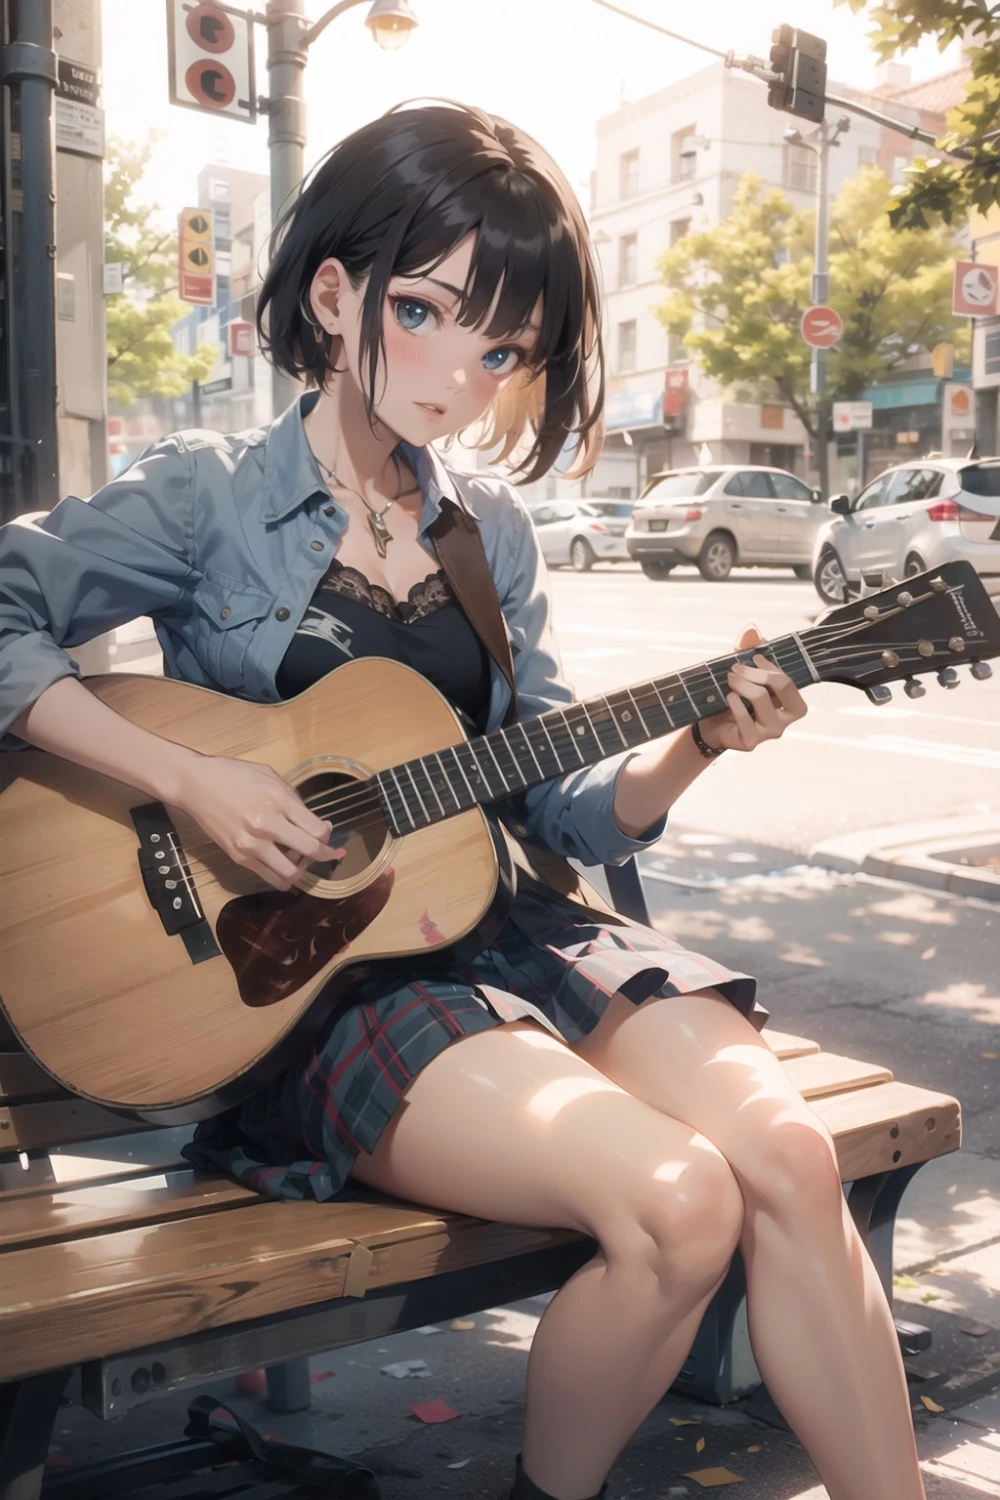 guitar-anime-style-all-ages-48